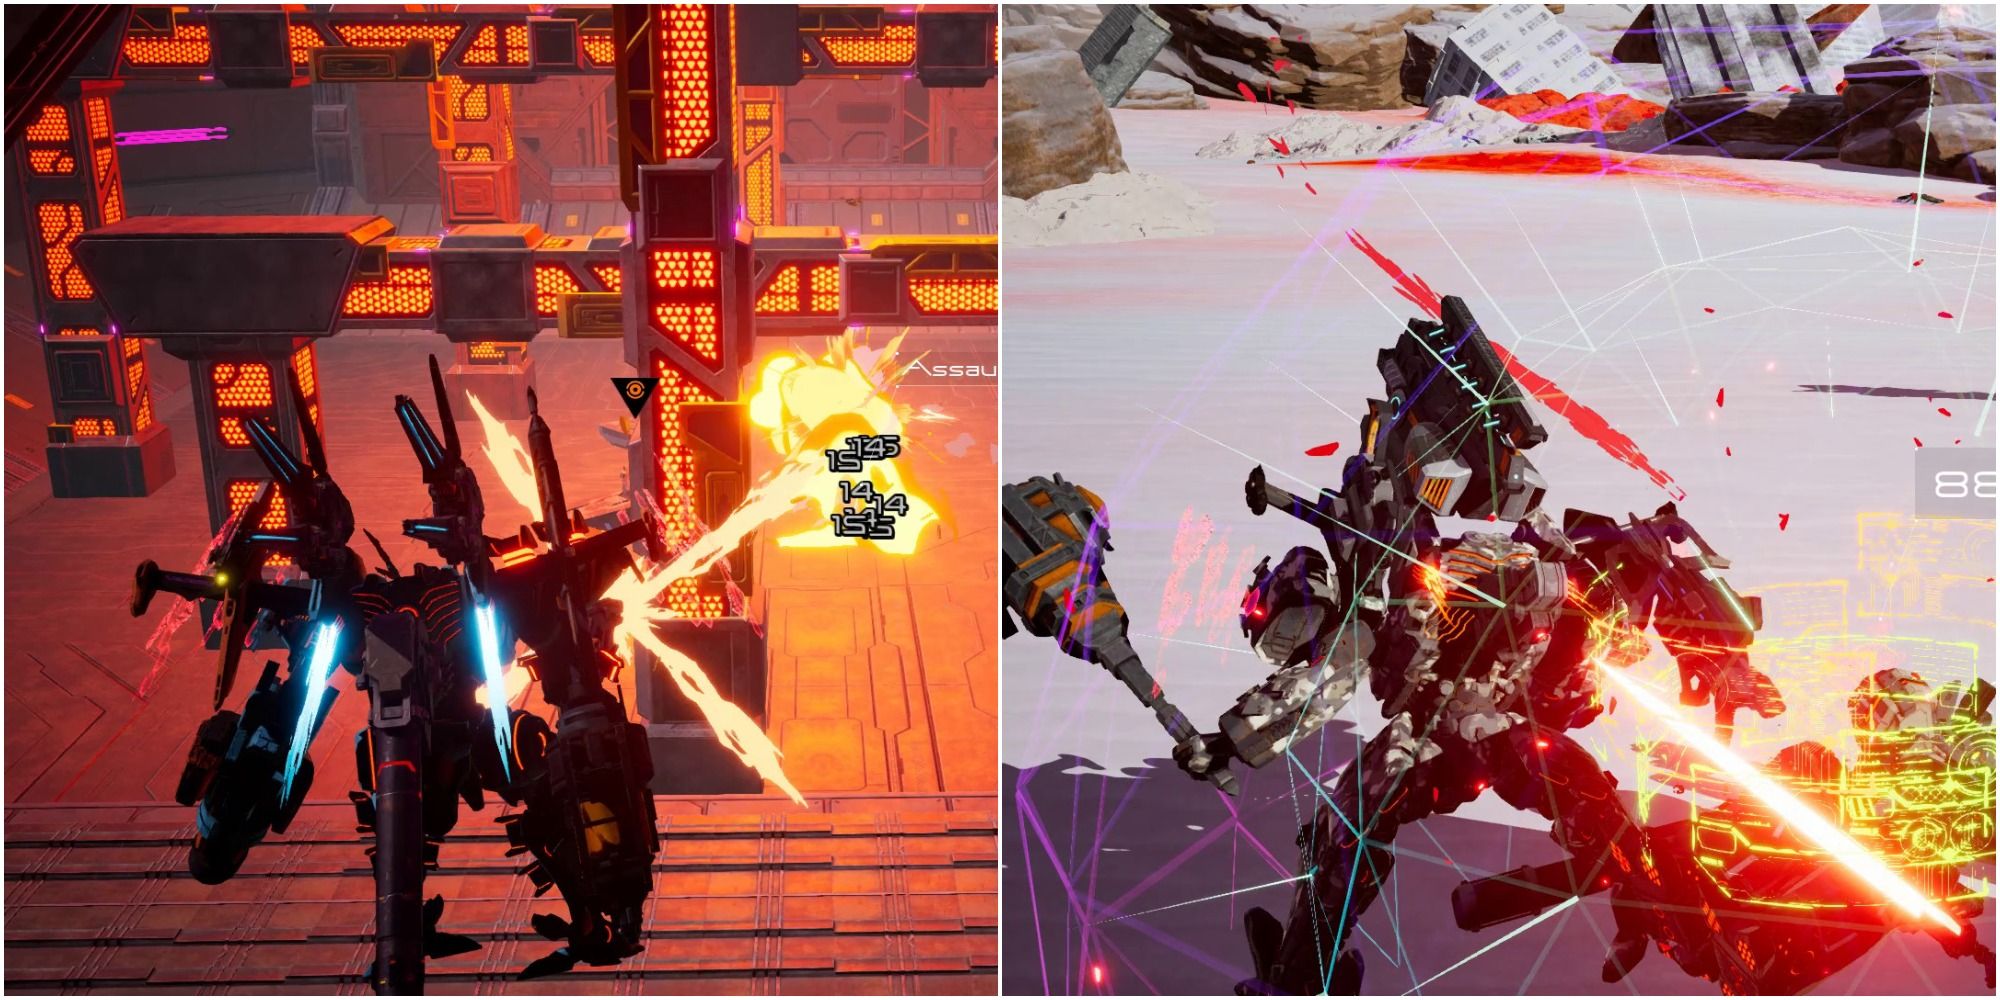 A collage showing gameplay in Daemon X Machina